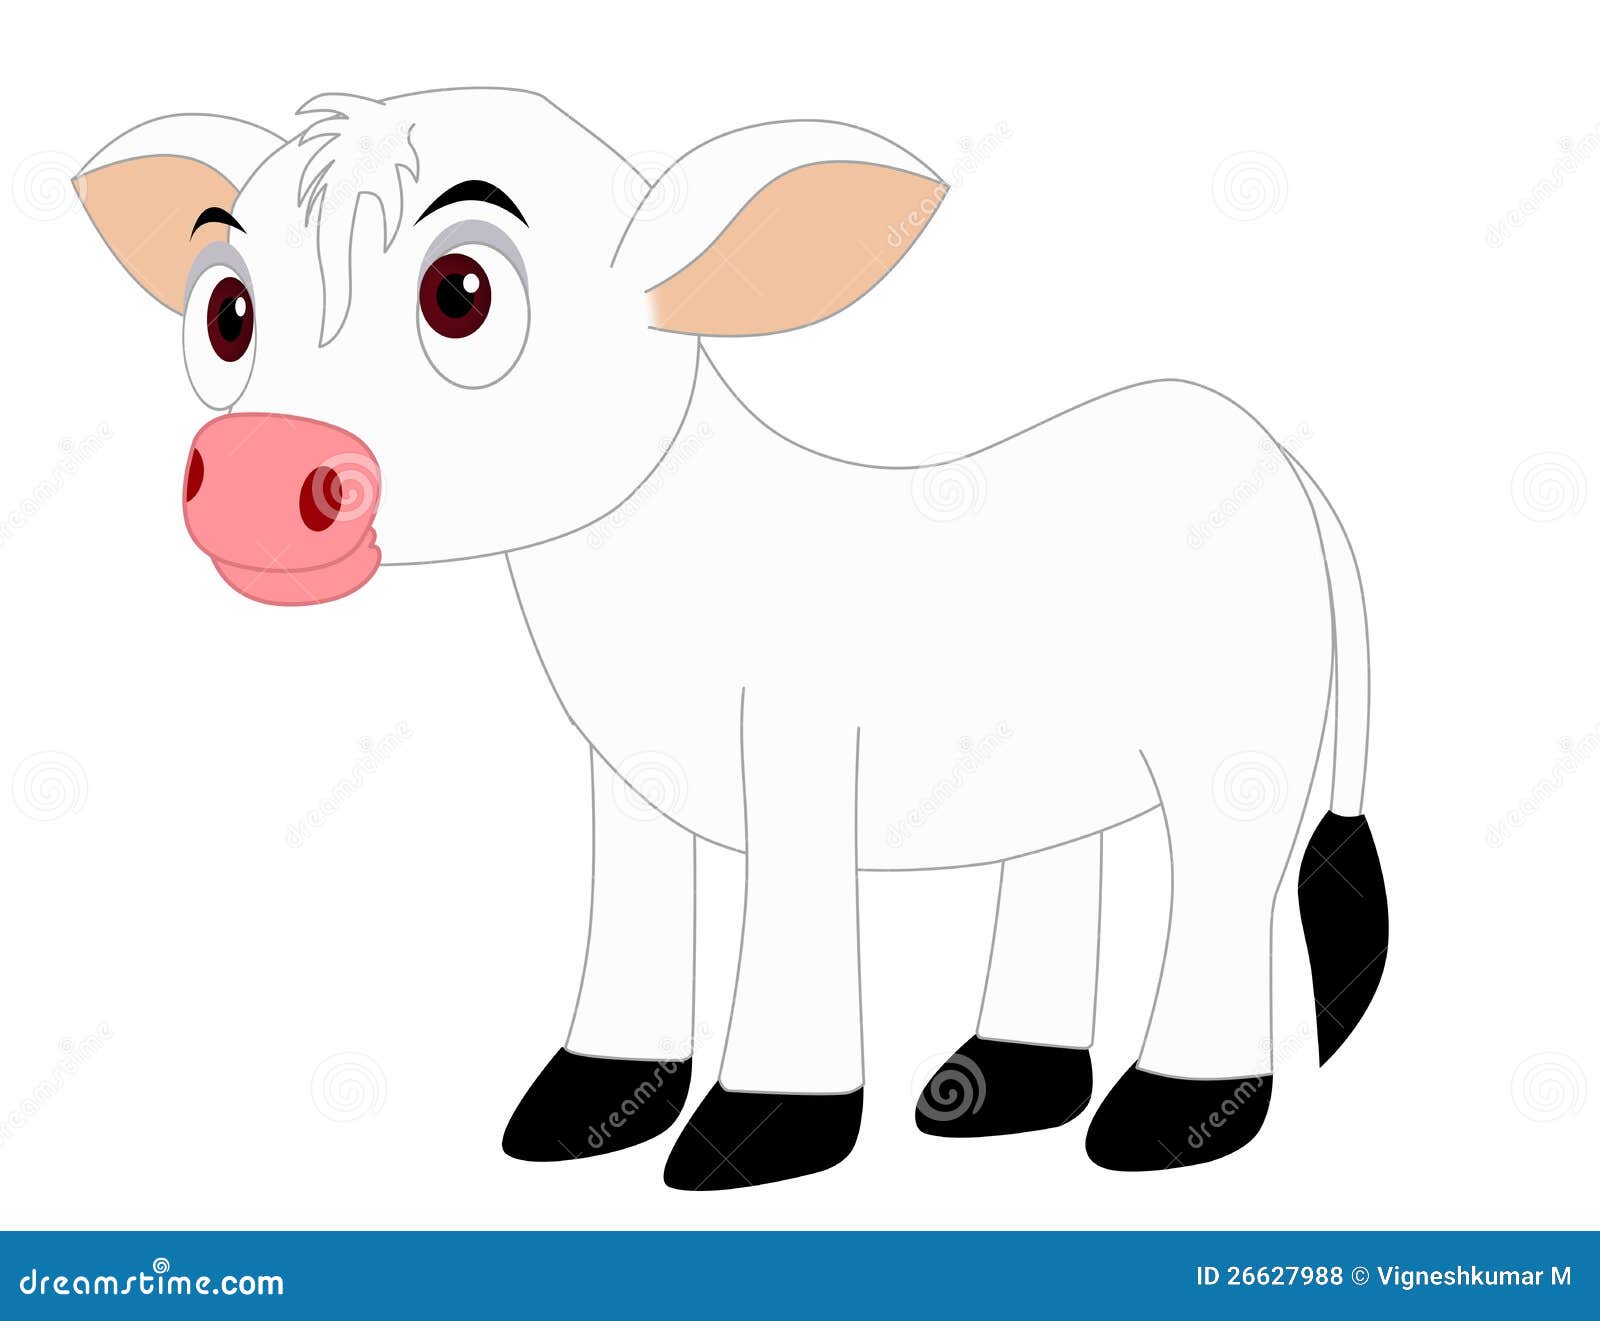 cow and calf clipart - photo #29